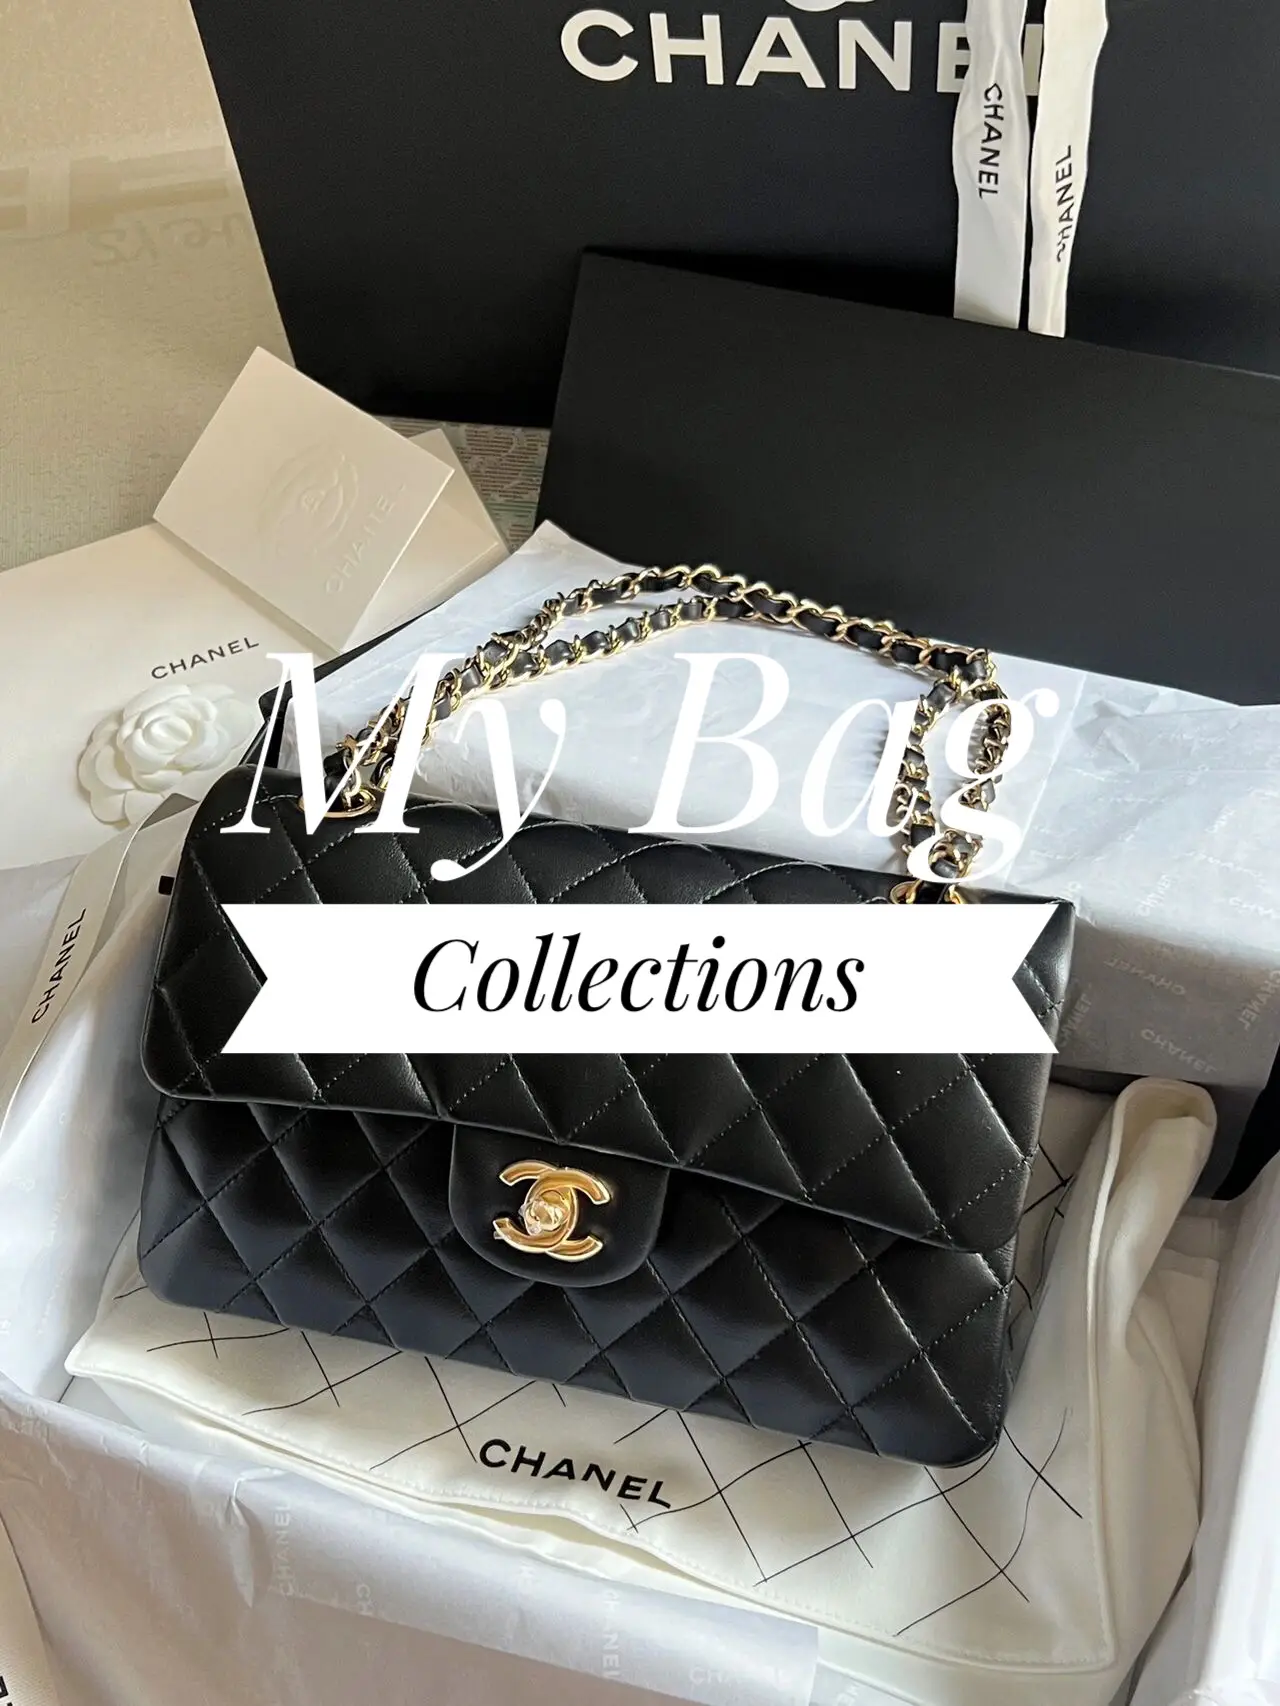 Chanel cf small, life's first Chanel bag, Gallery posted by Nora Nathan